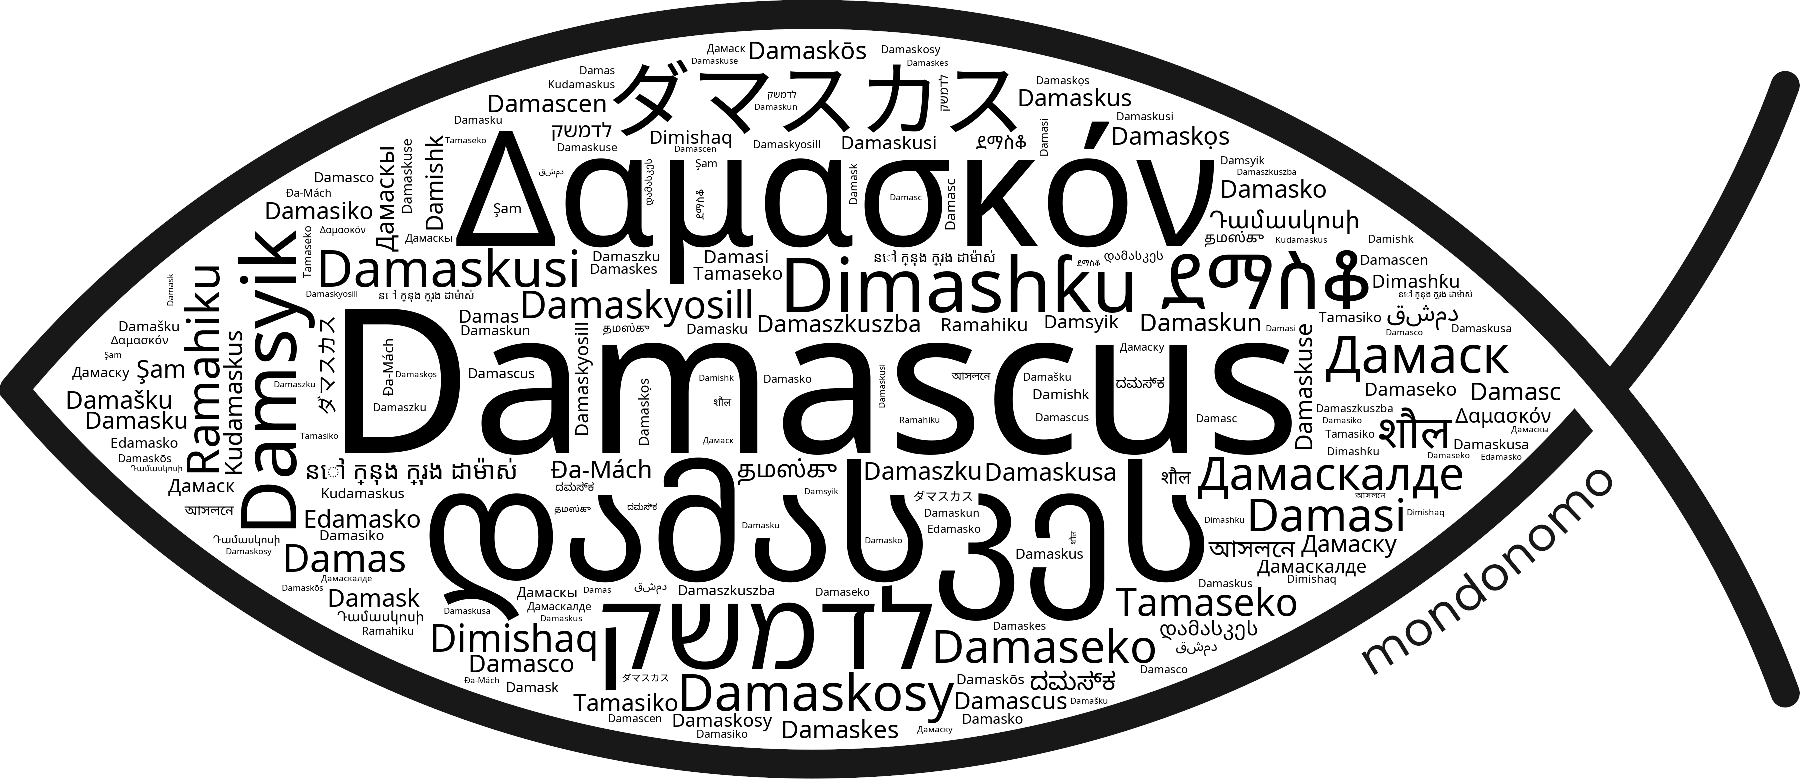 Name Damascus in the world's Bibles